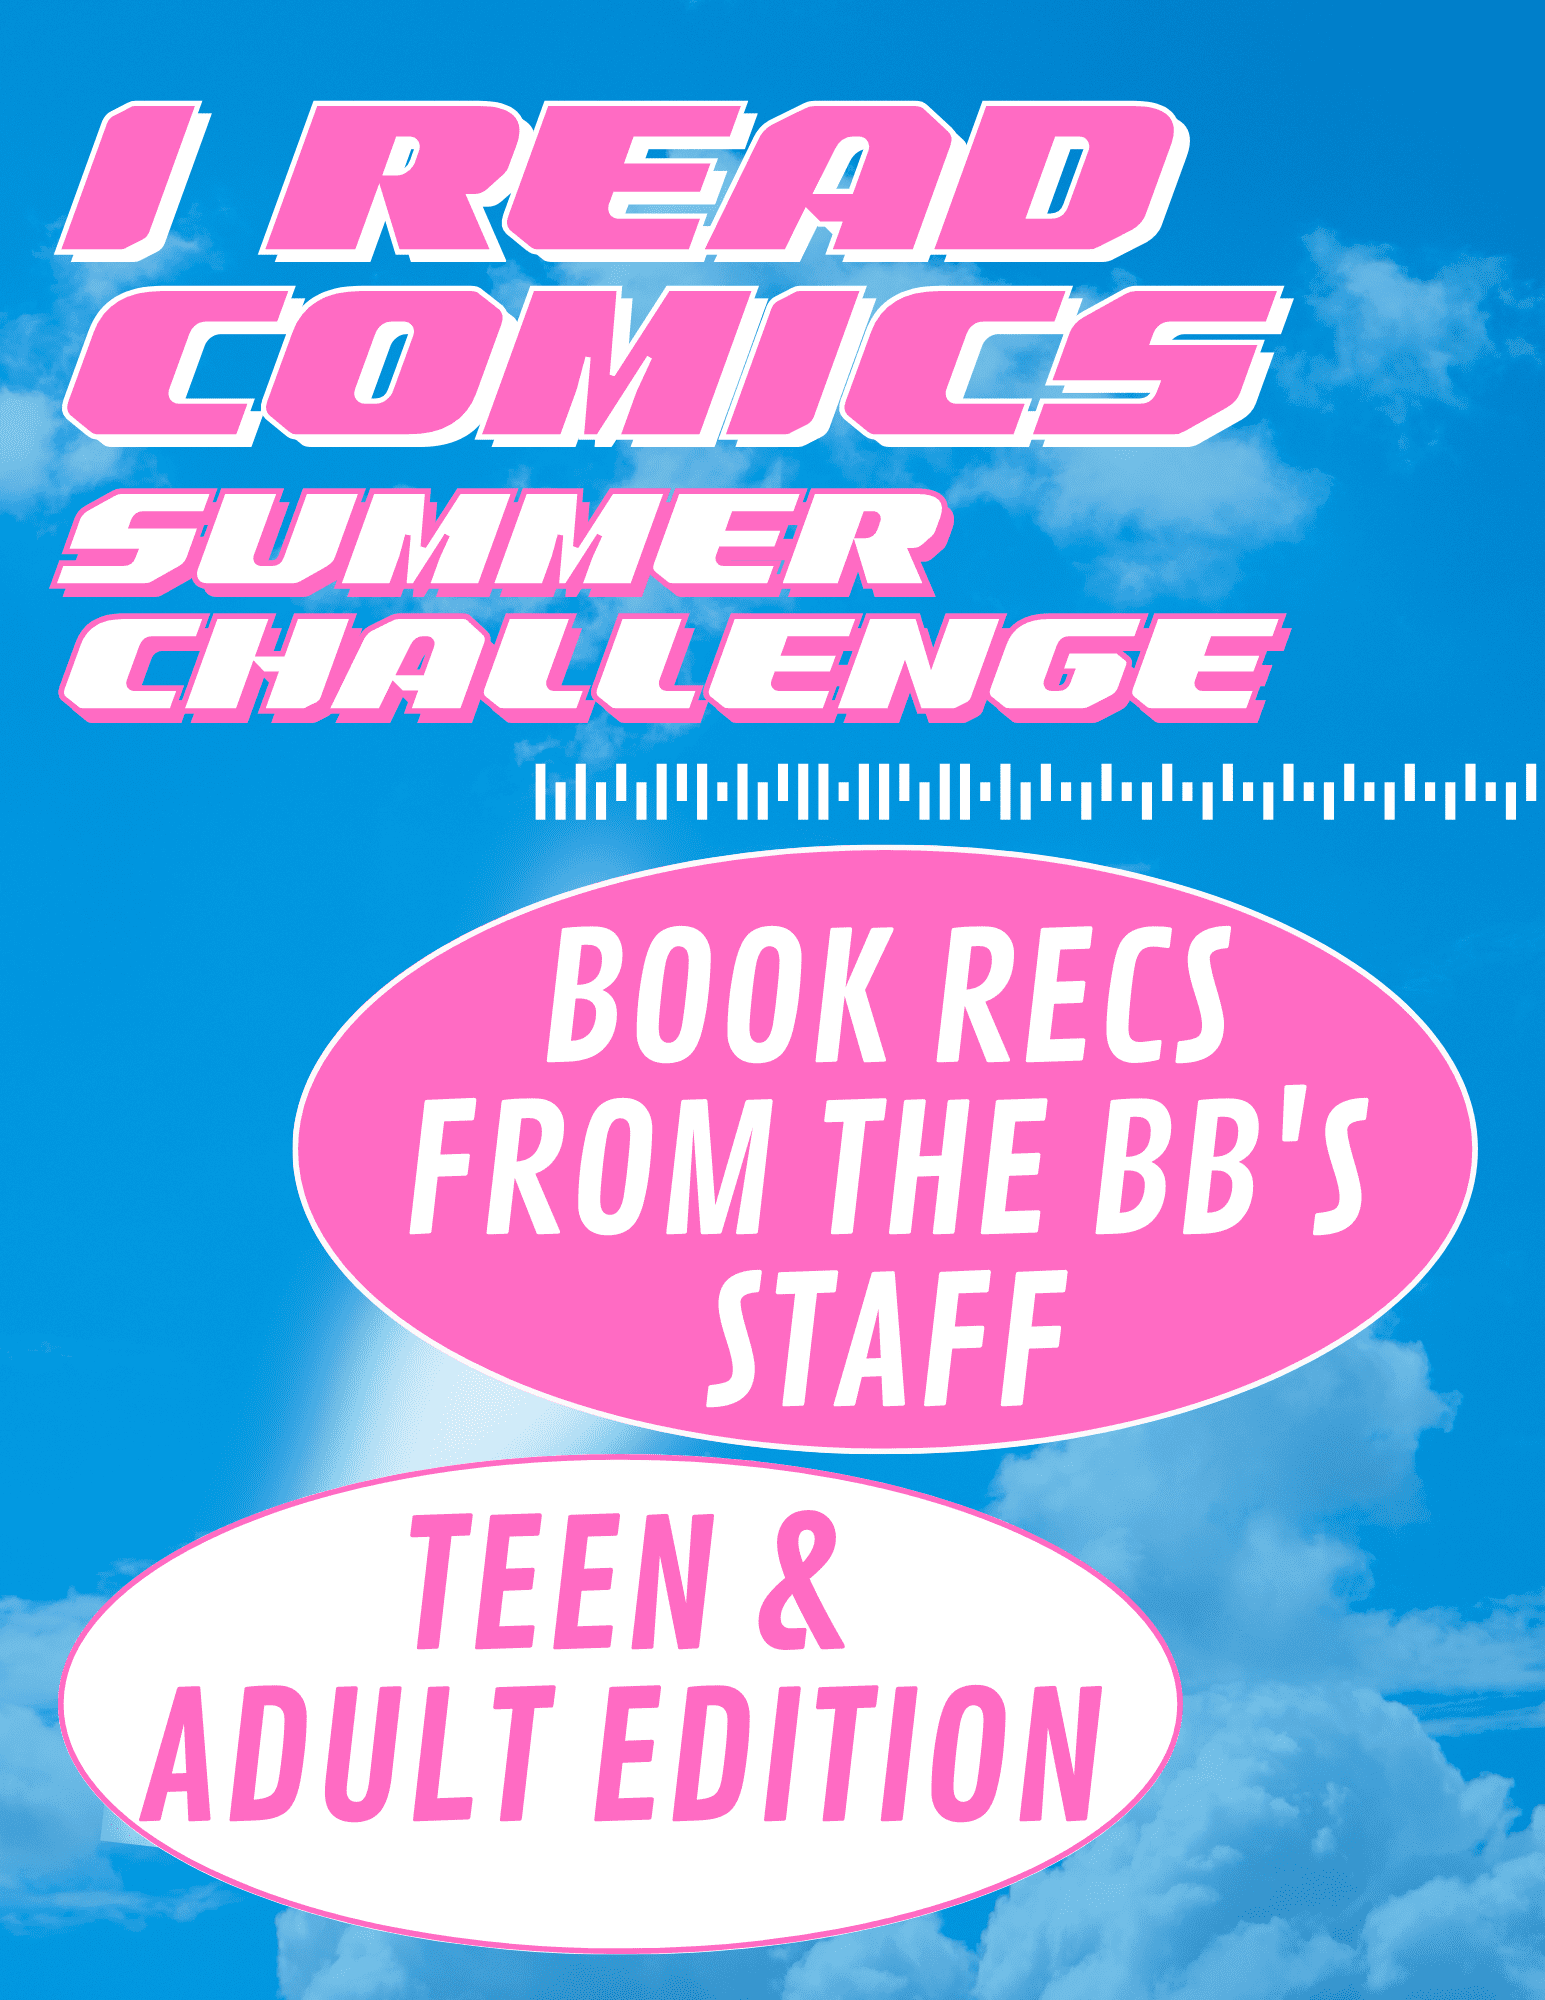 The Official “I Read Comics Summer Challenge” Recommendation List!